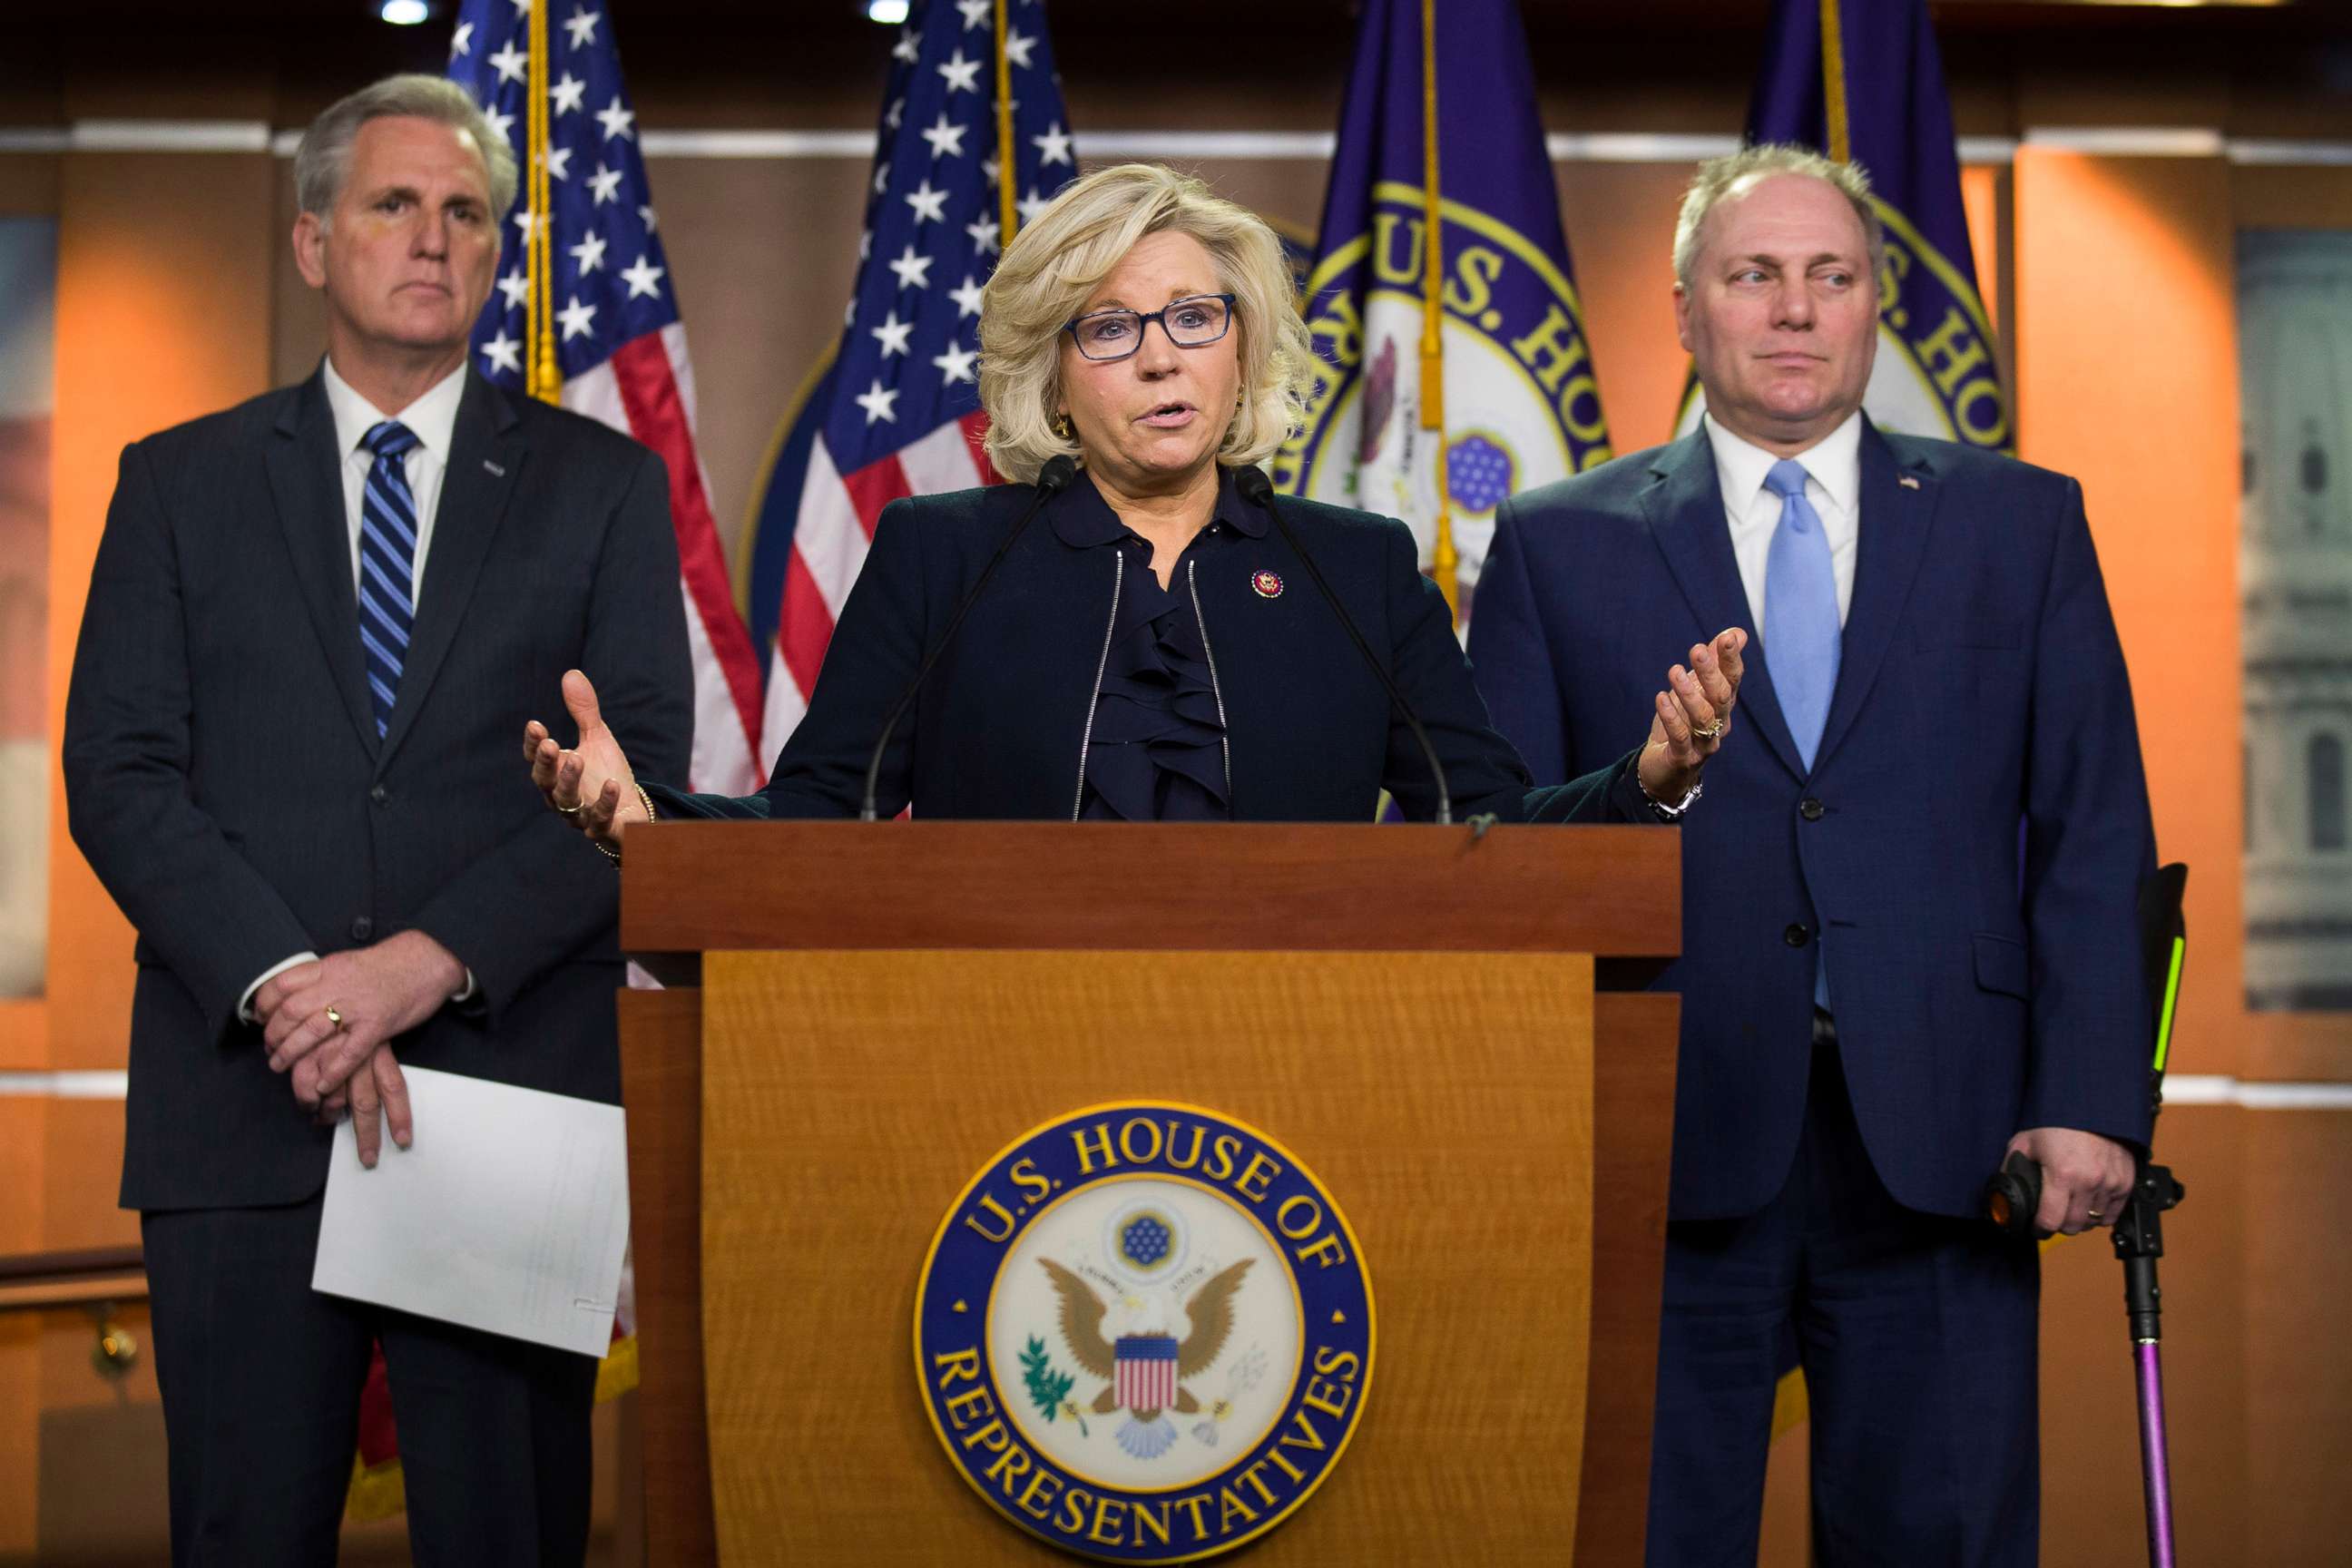 PHOTO: House Republican Conference chair Rep. center, accompanied by House Minority Leader Kevin McCarthy of Calif., left, and House Minority Whip Steve Scalise of La., speaks at a news conference on Capitol Hill, Jan. 15, 2019, in Washington.